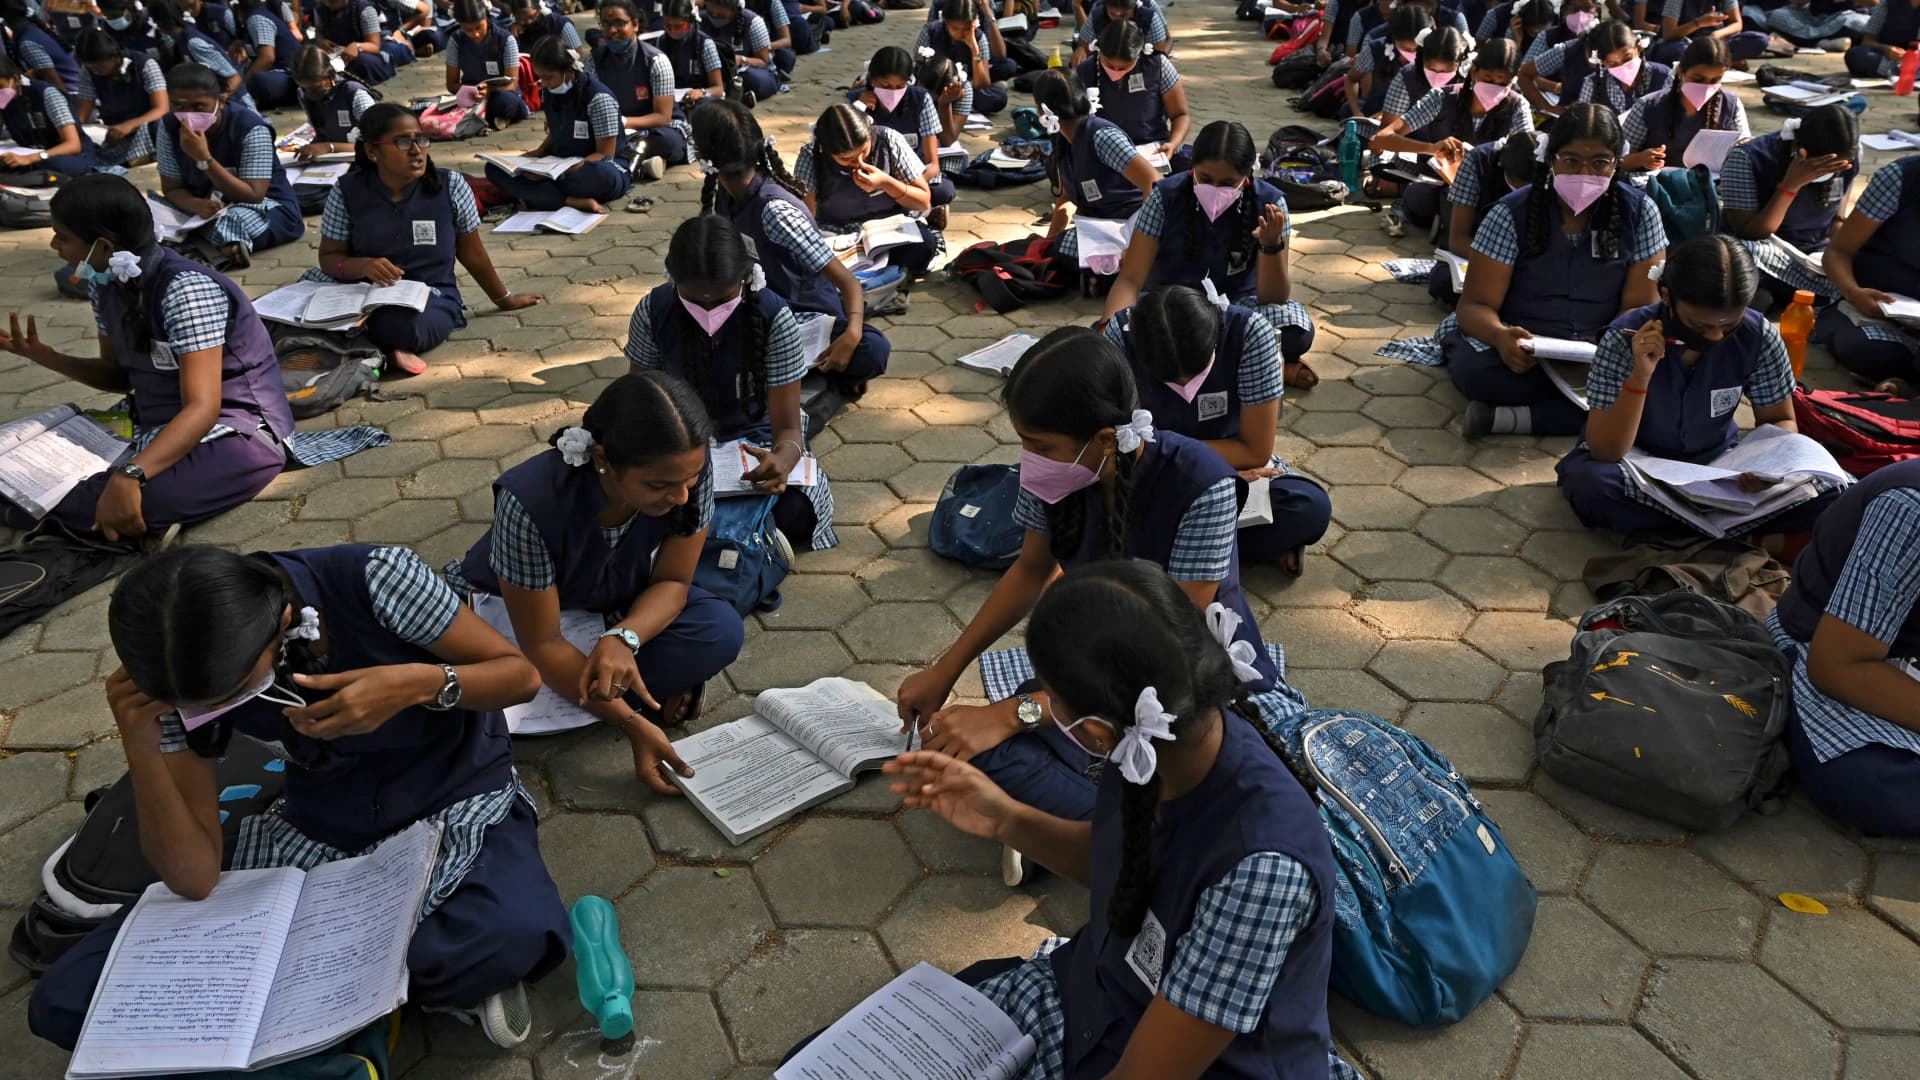 UNESCO says cash spent on schooling does not fit its significance